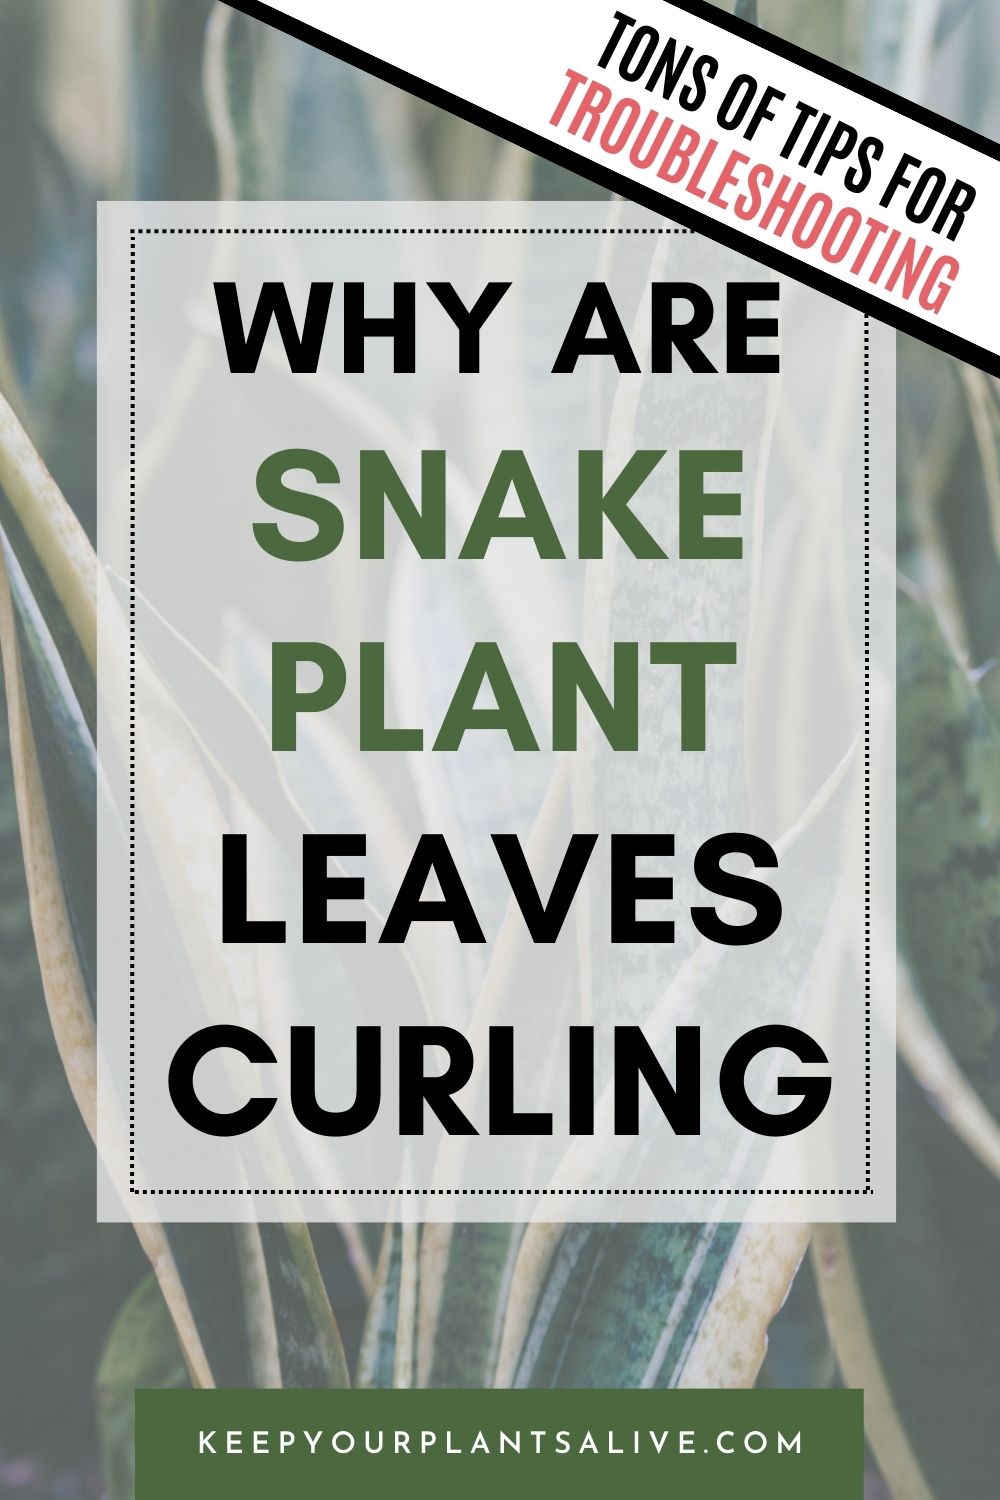 Why are snake plant leaves curling